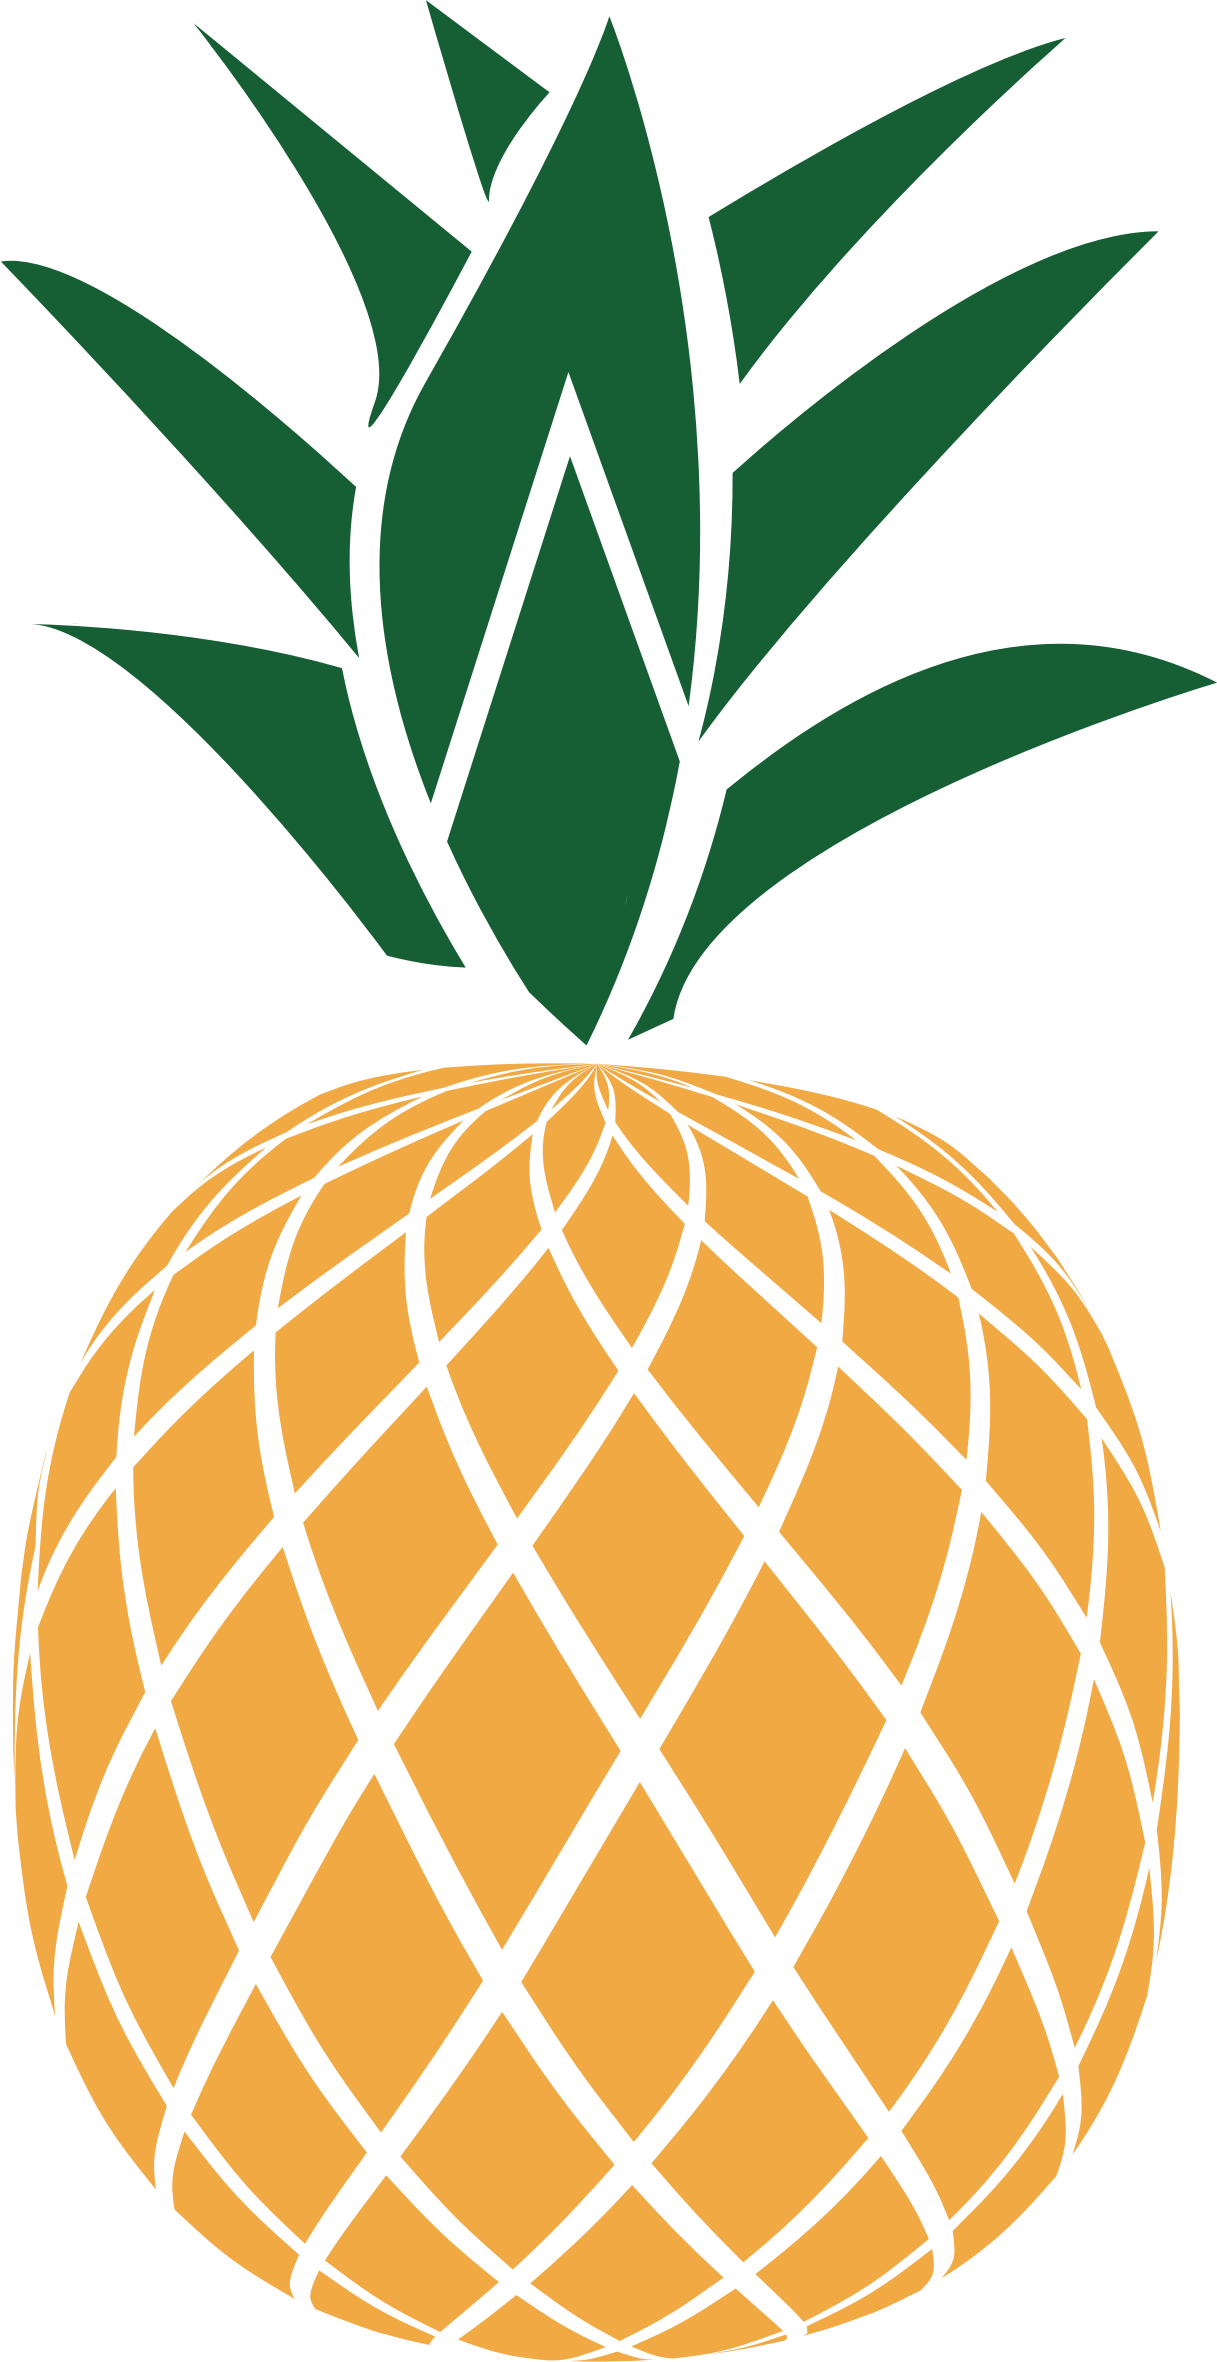 Download Free Download Pineapple Vector Clipart Pineapple Clip ...